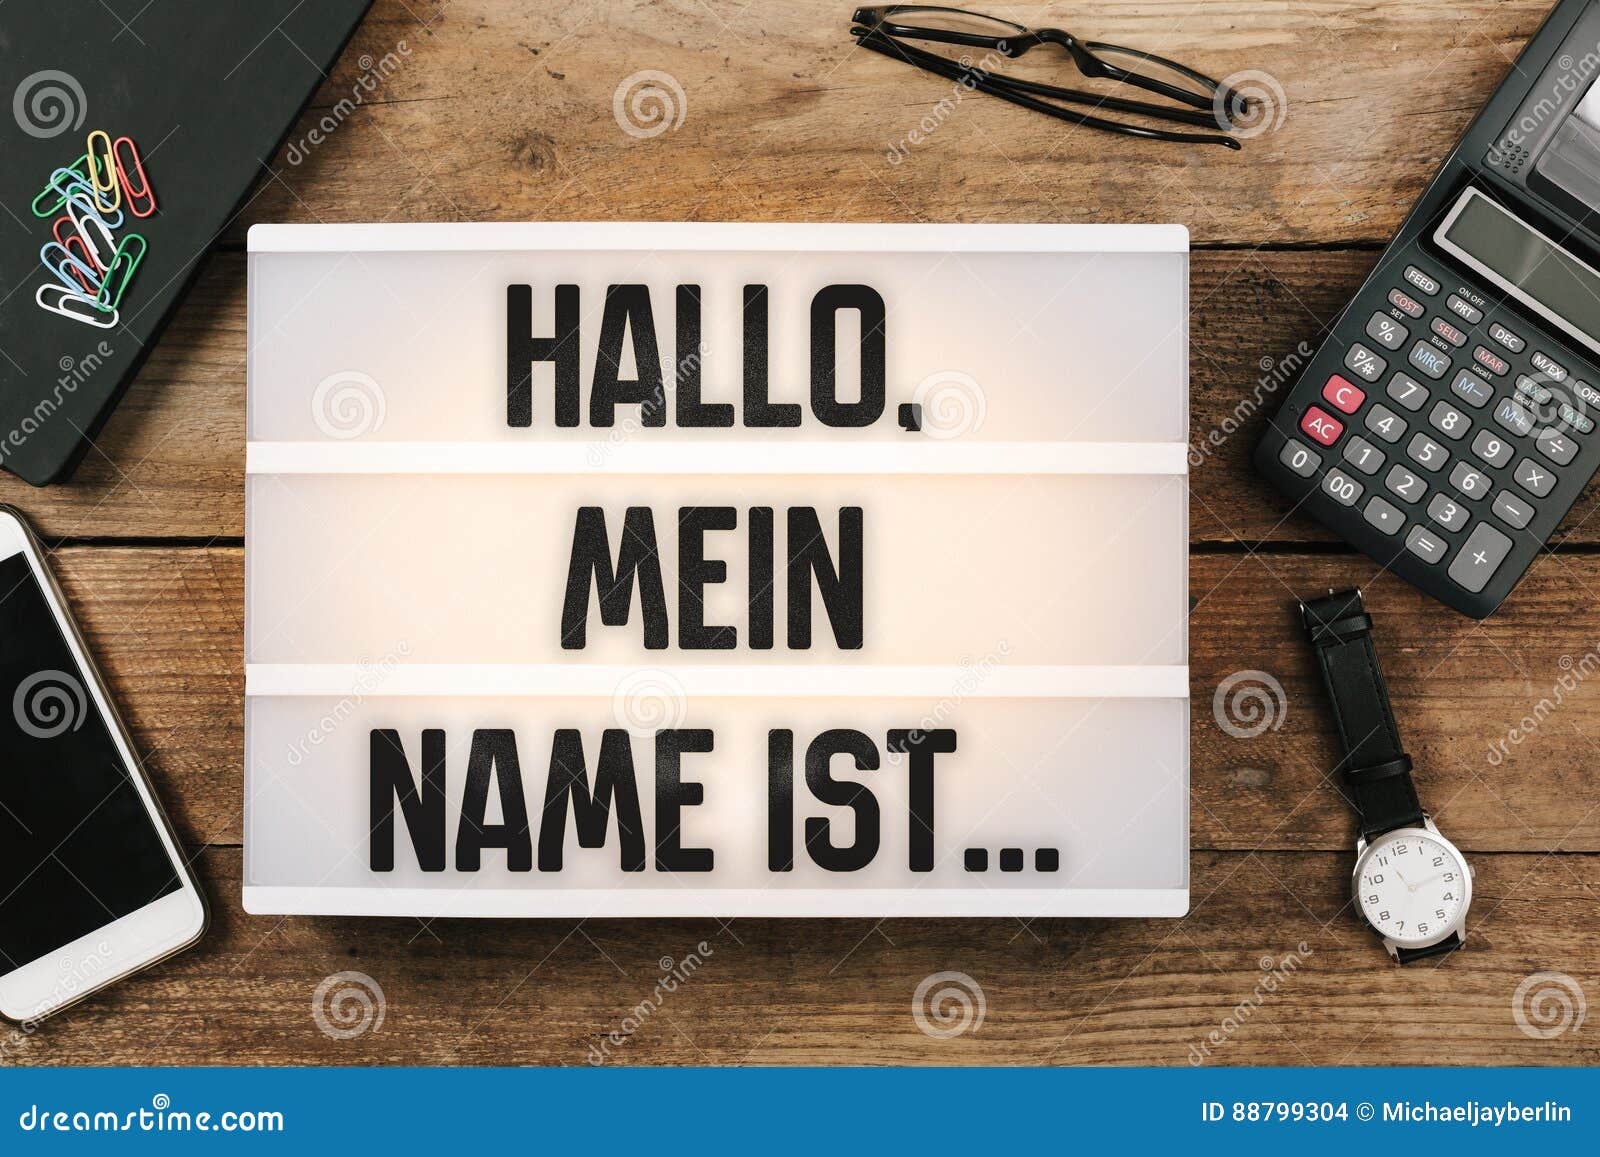 Mein name ist